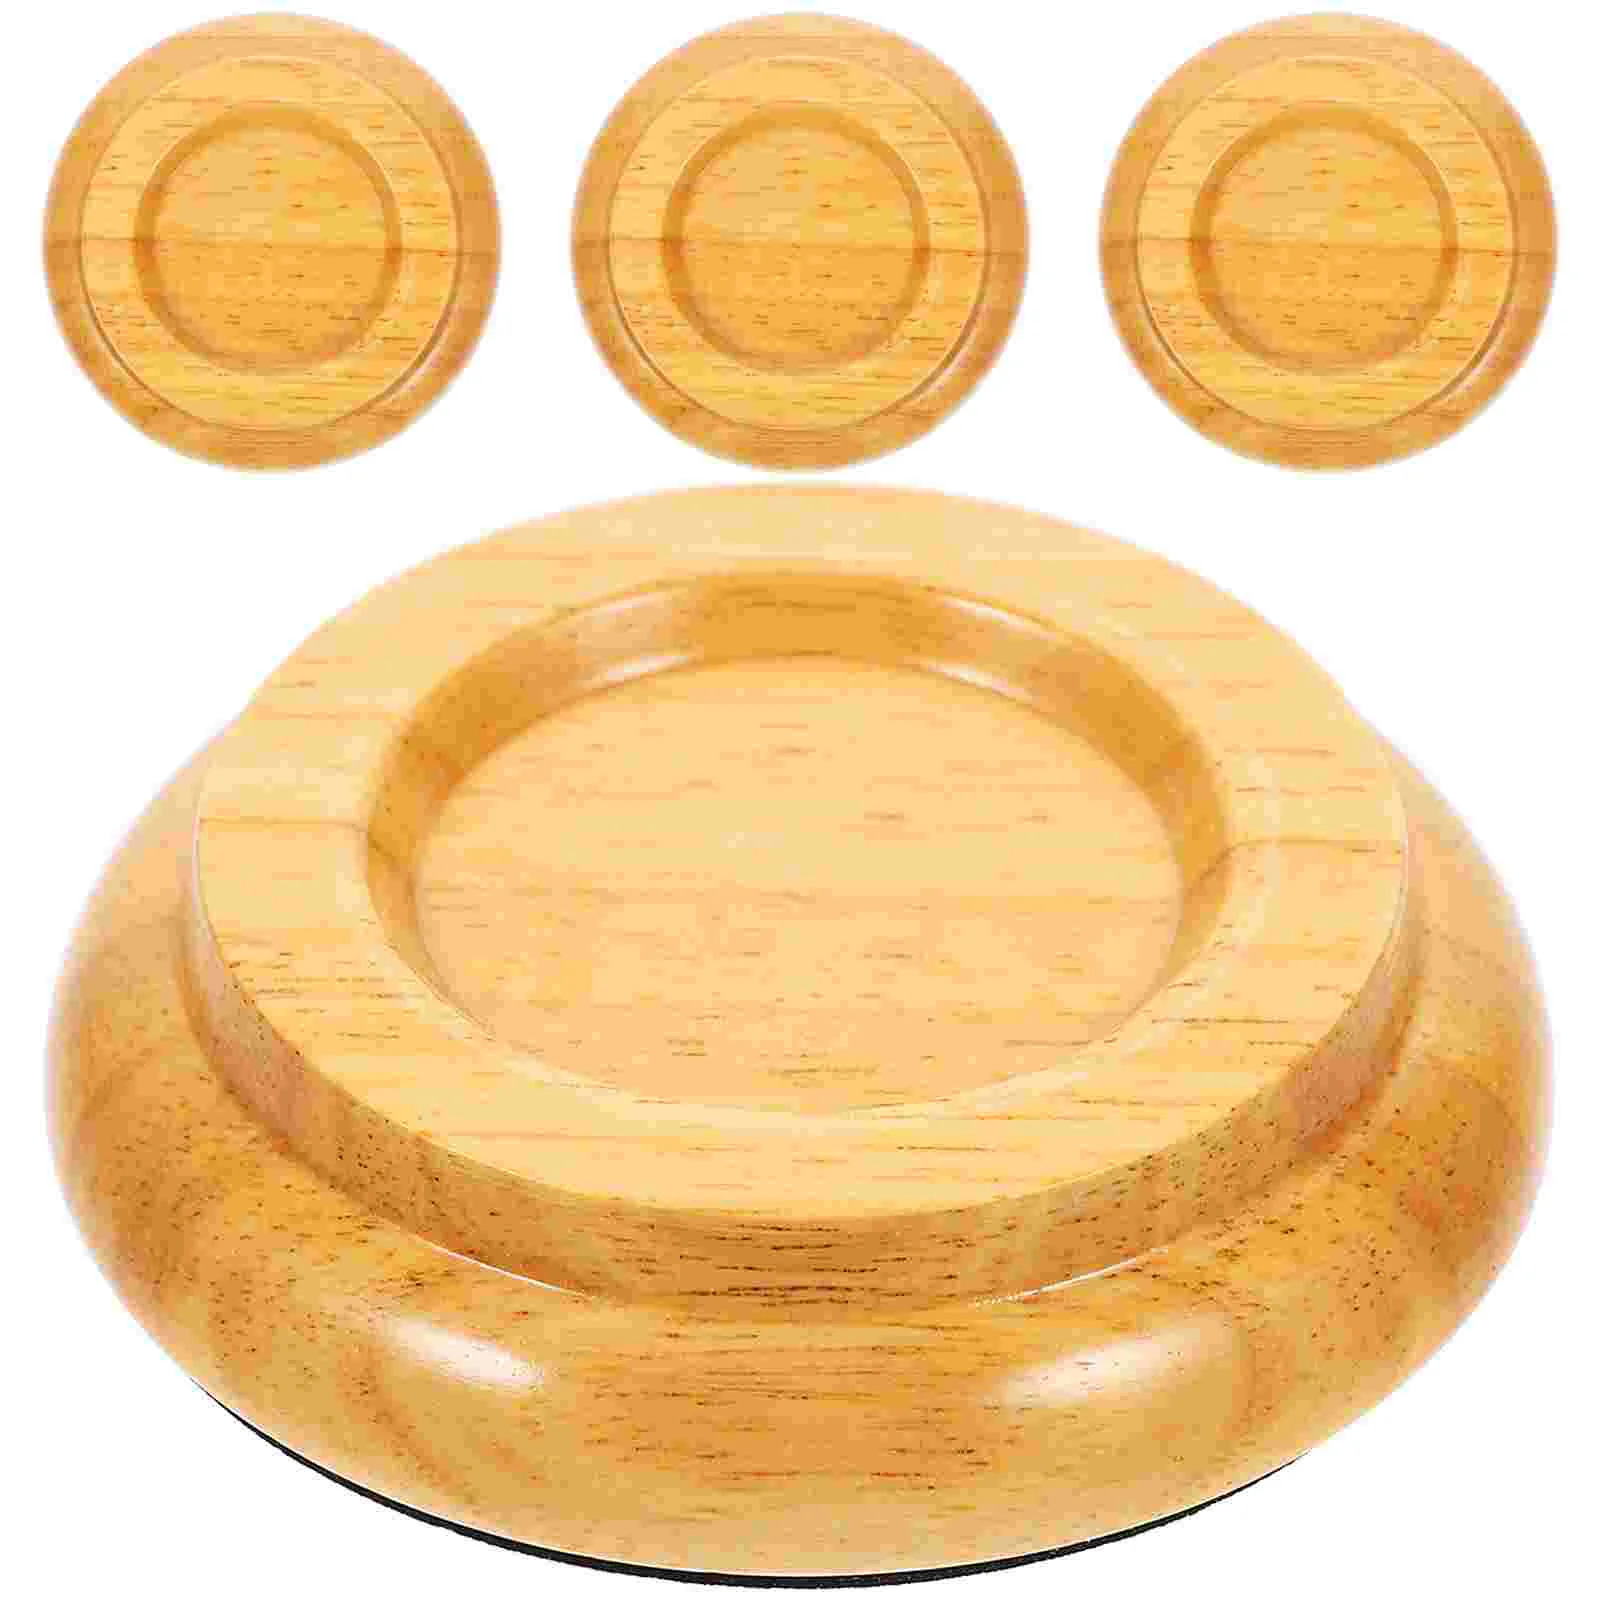 

4 pcs Wood Piano Leg Pads Upright Grand Piano Caster Cups Piano Leg Mats for Floor Protection